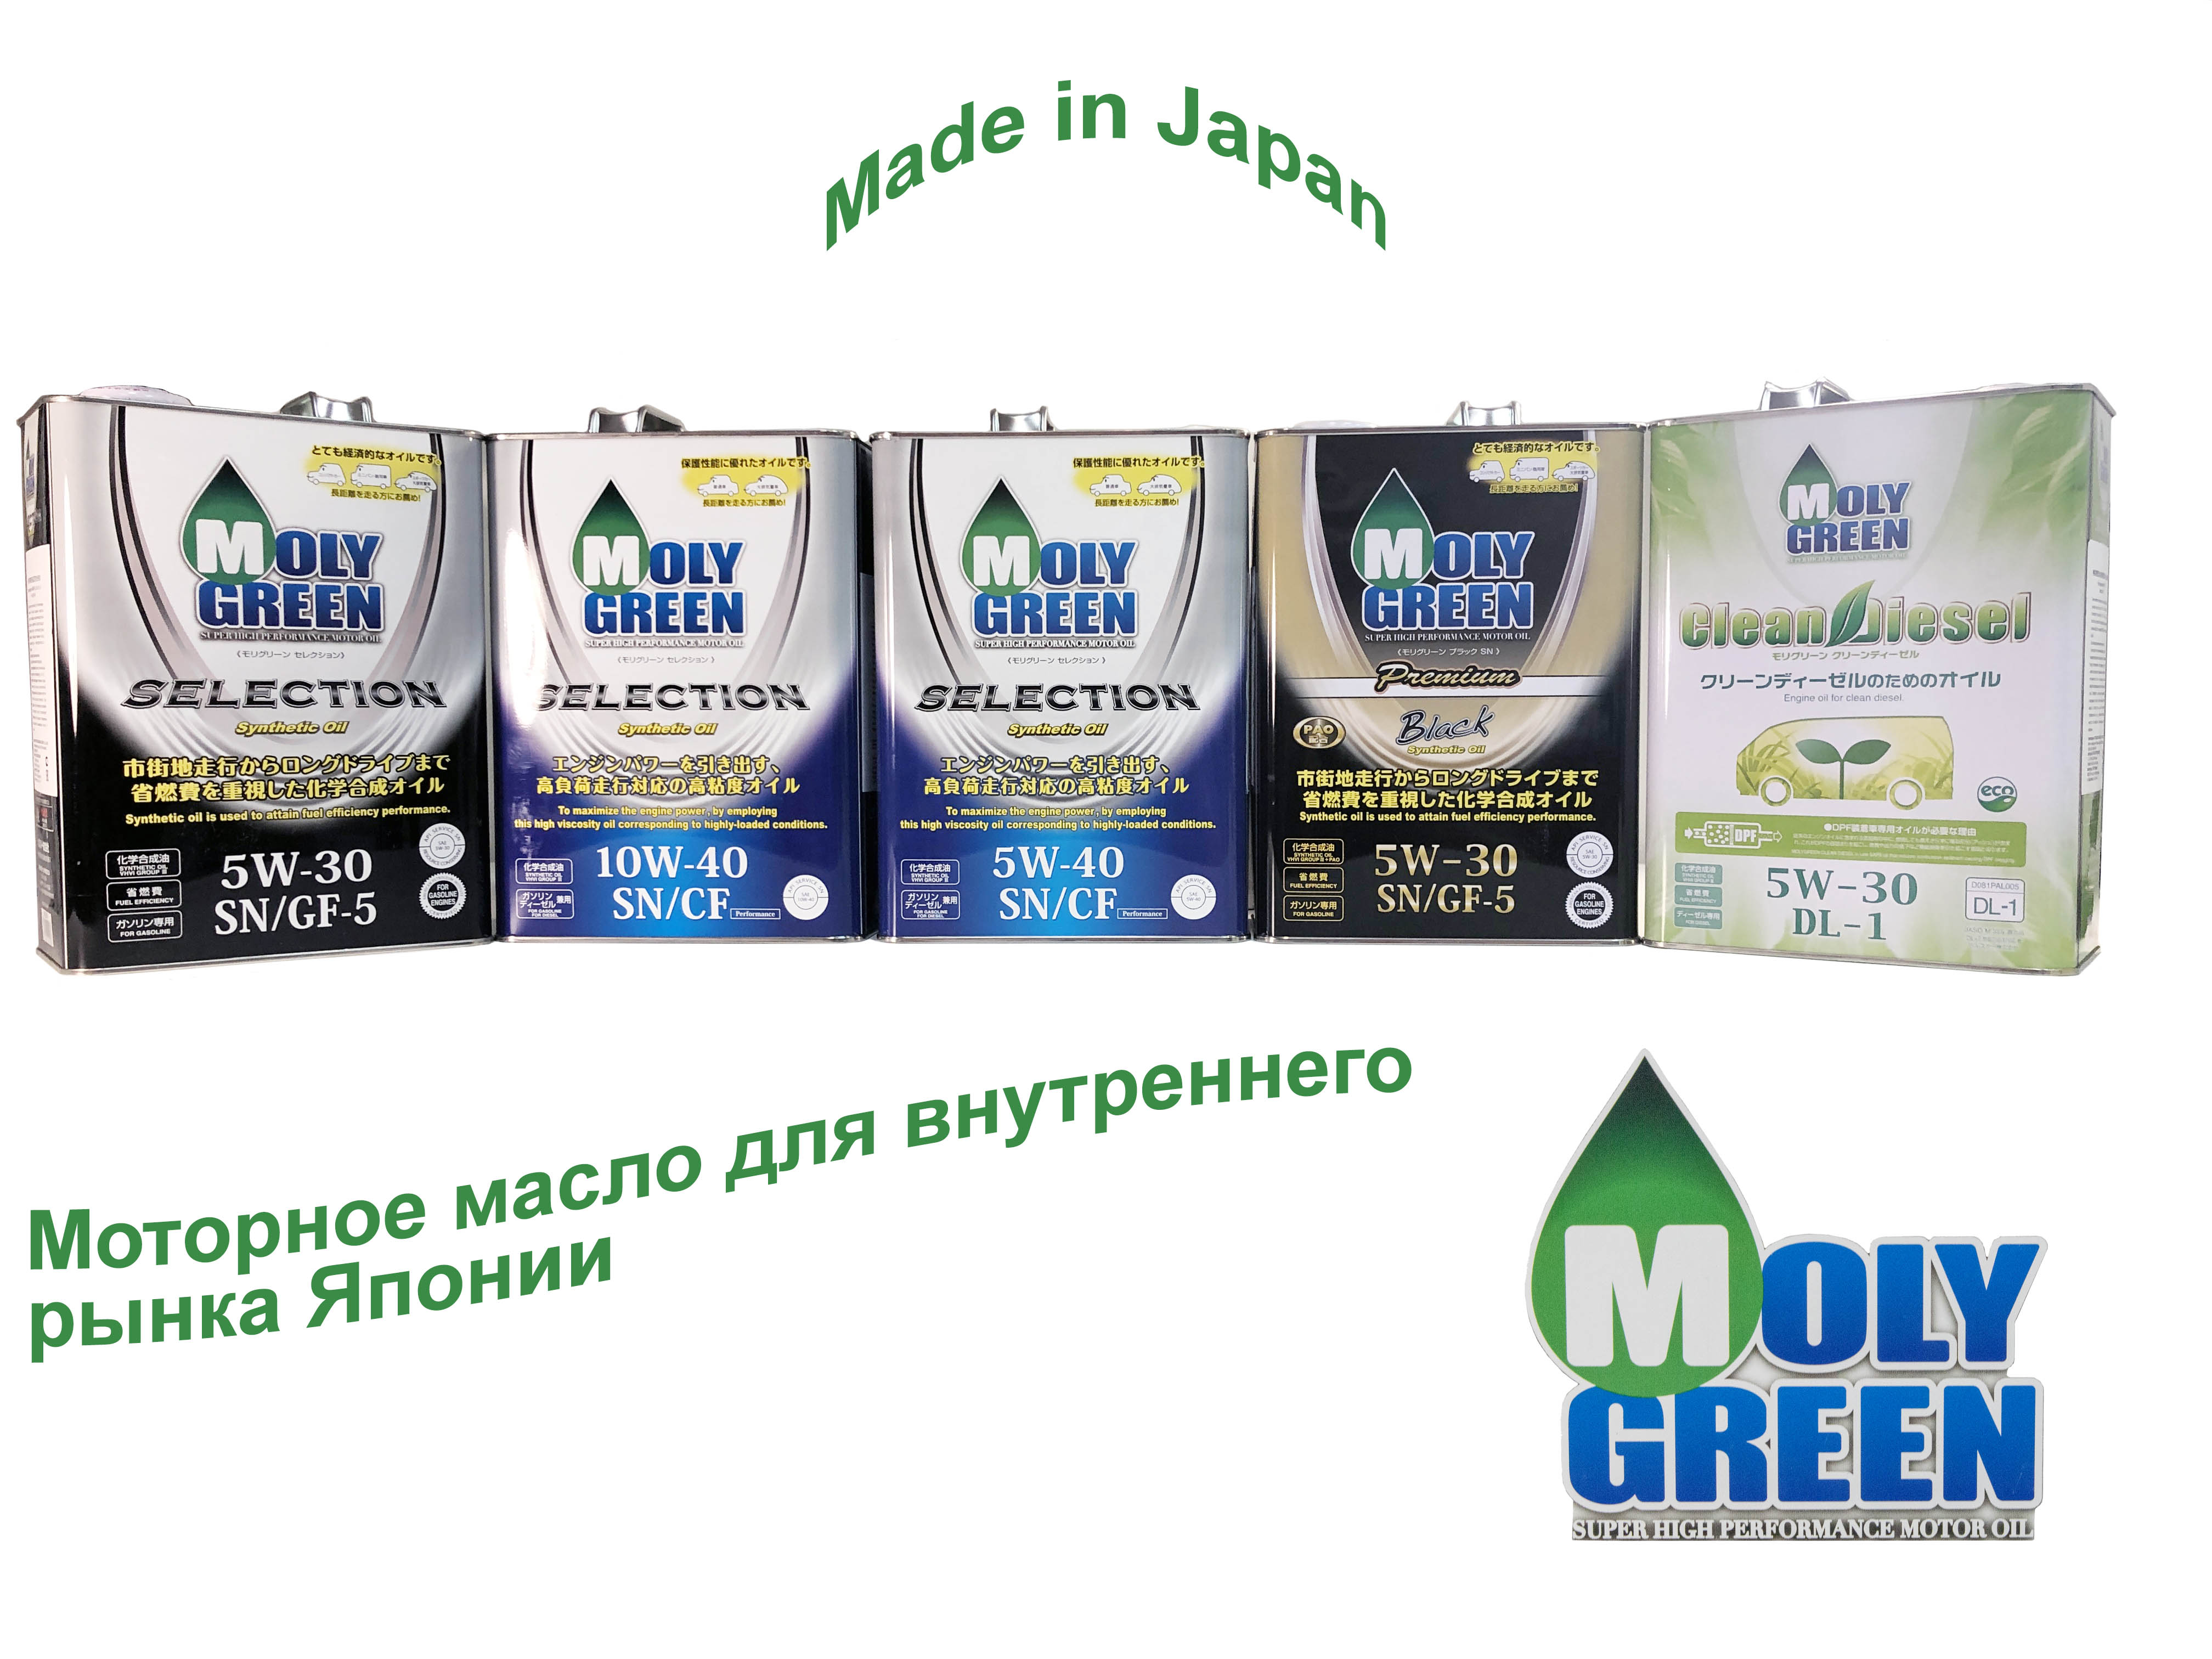 Moly green 5w40. Moly Green 5w30 selection. Масло моторное 5w30 Moly Green selection SP/gf. Moly Green selection 5w-30 тесты. MOLYGREEN Premium Black SN/gf-5 5w-30.